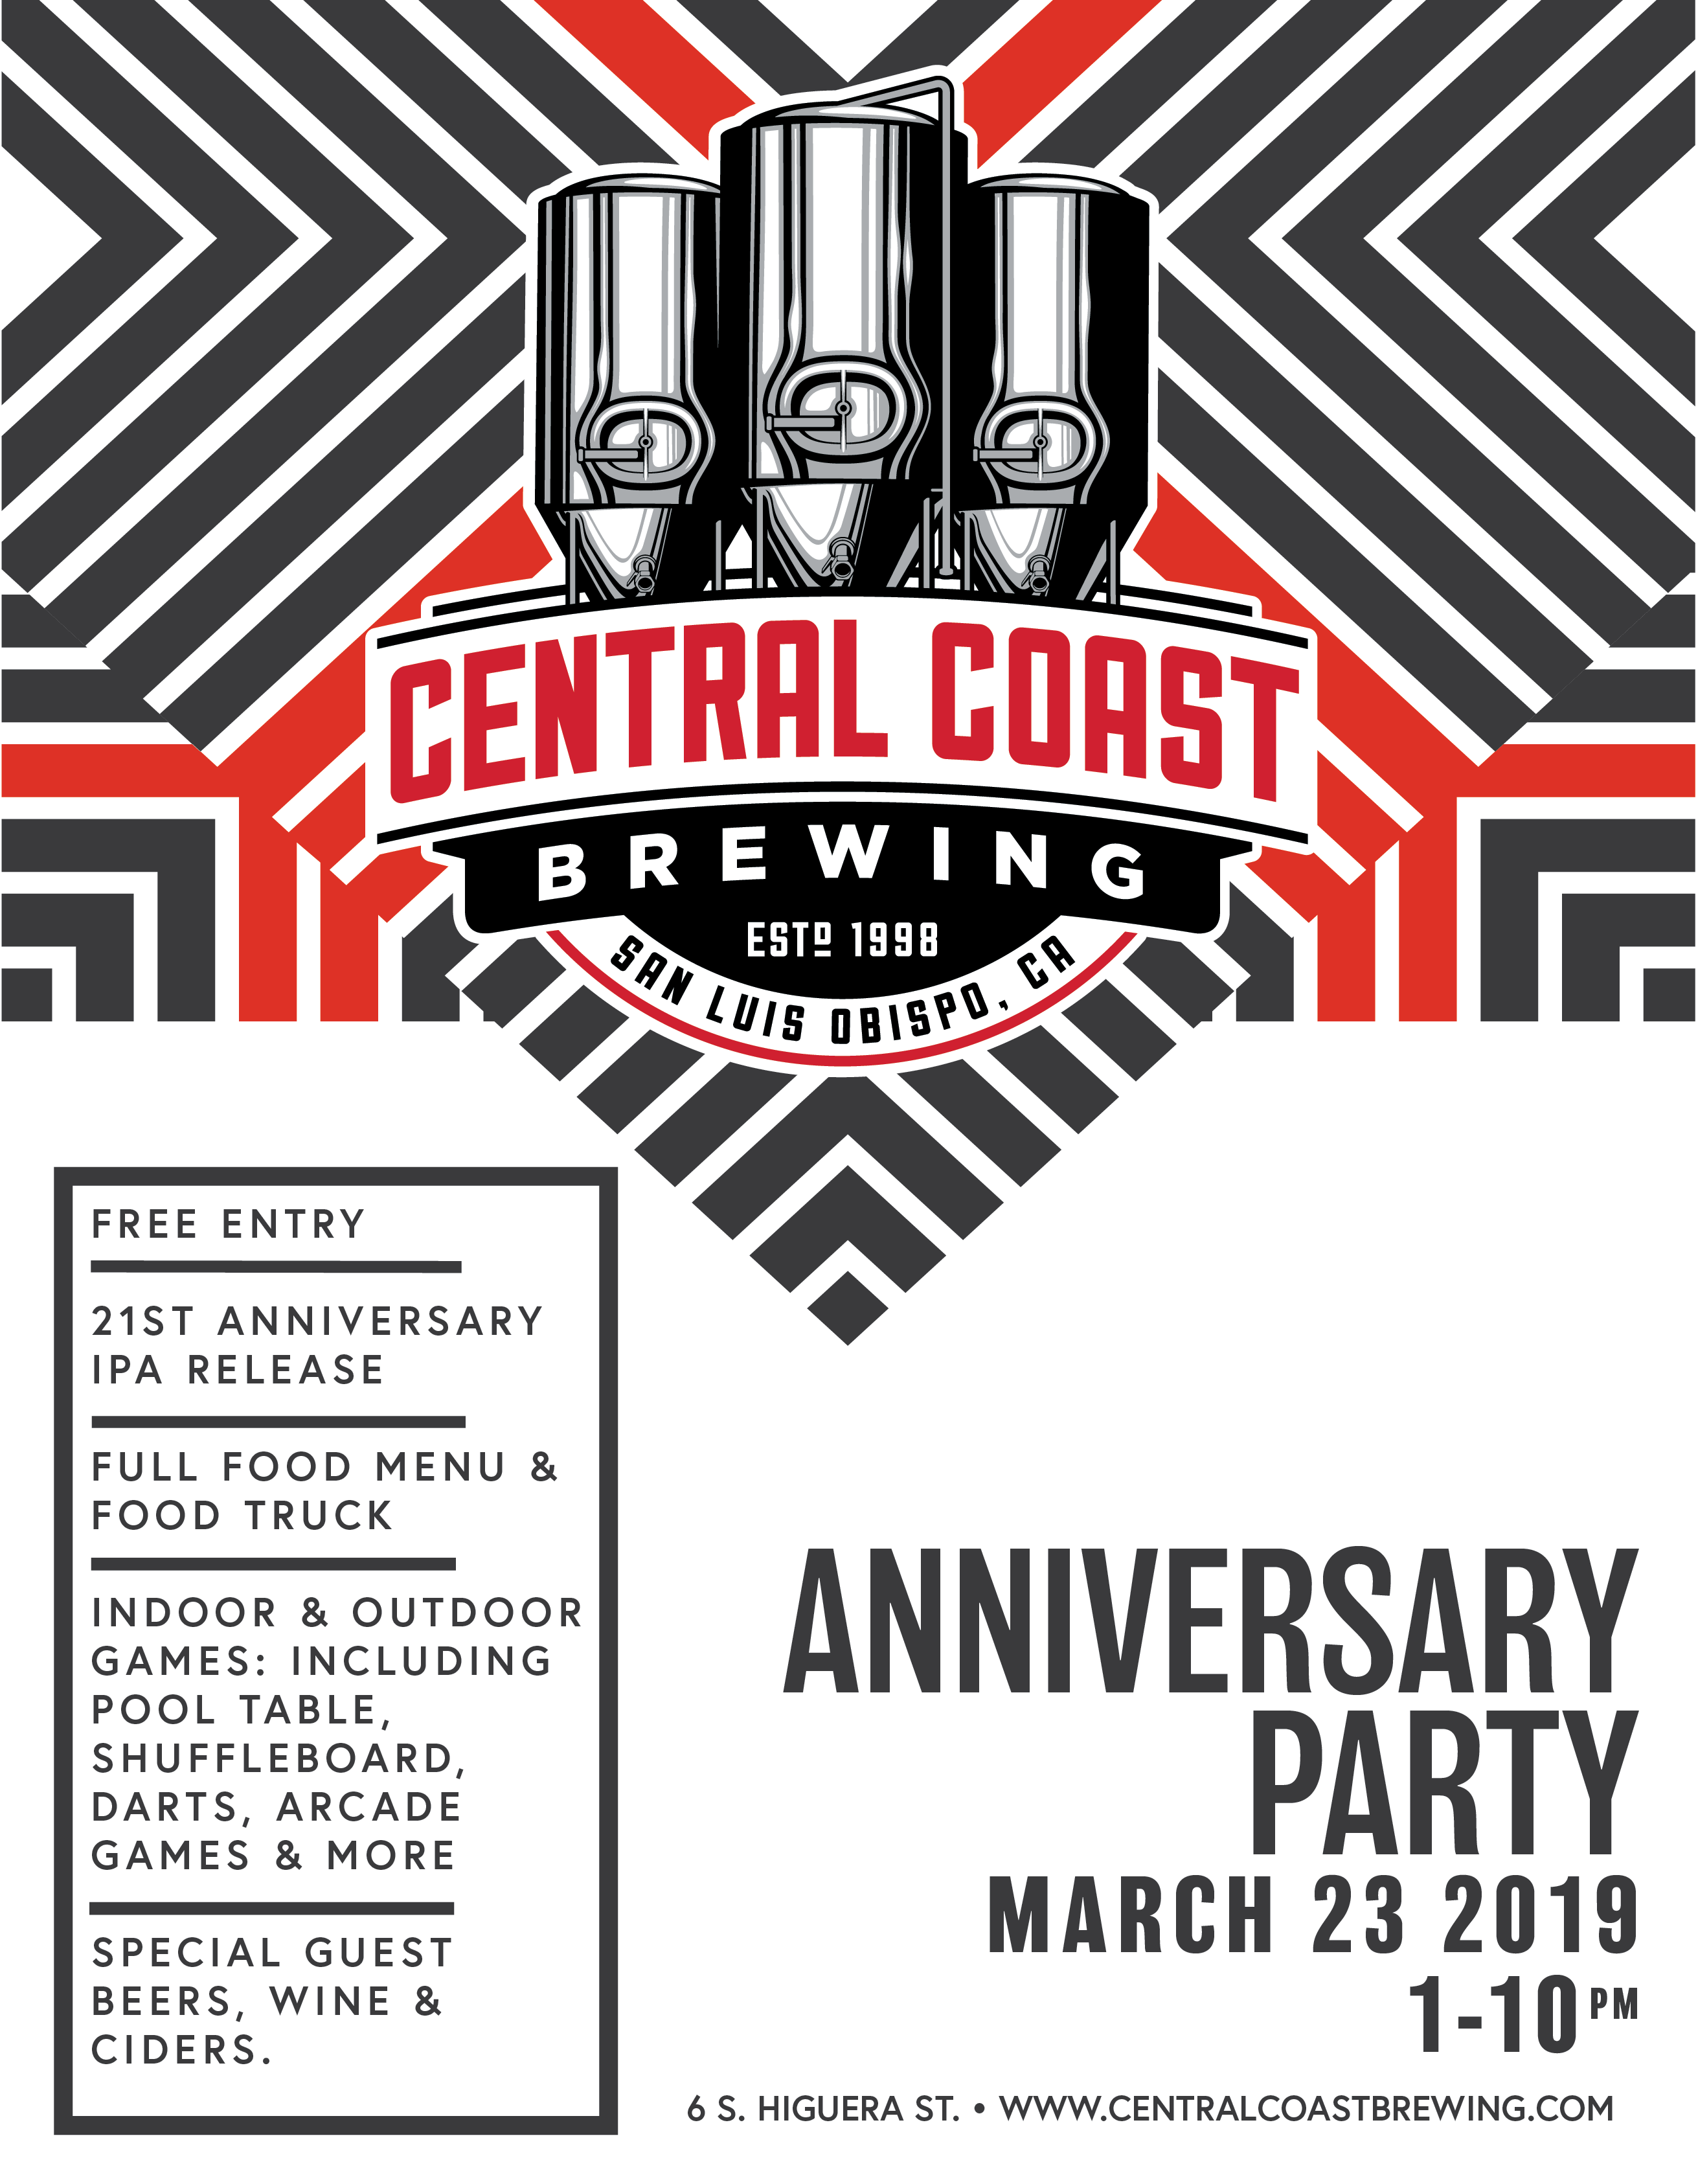 Central Coast Brewing - 21st Anniversary